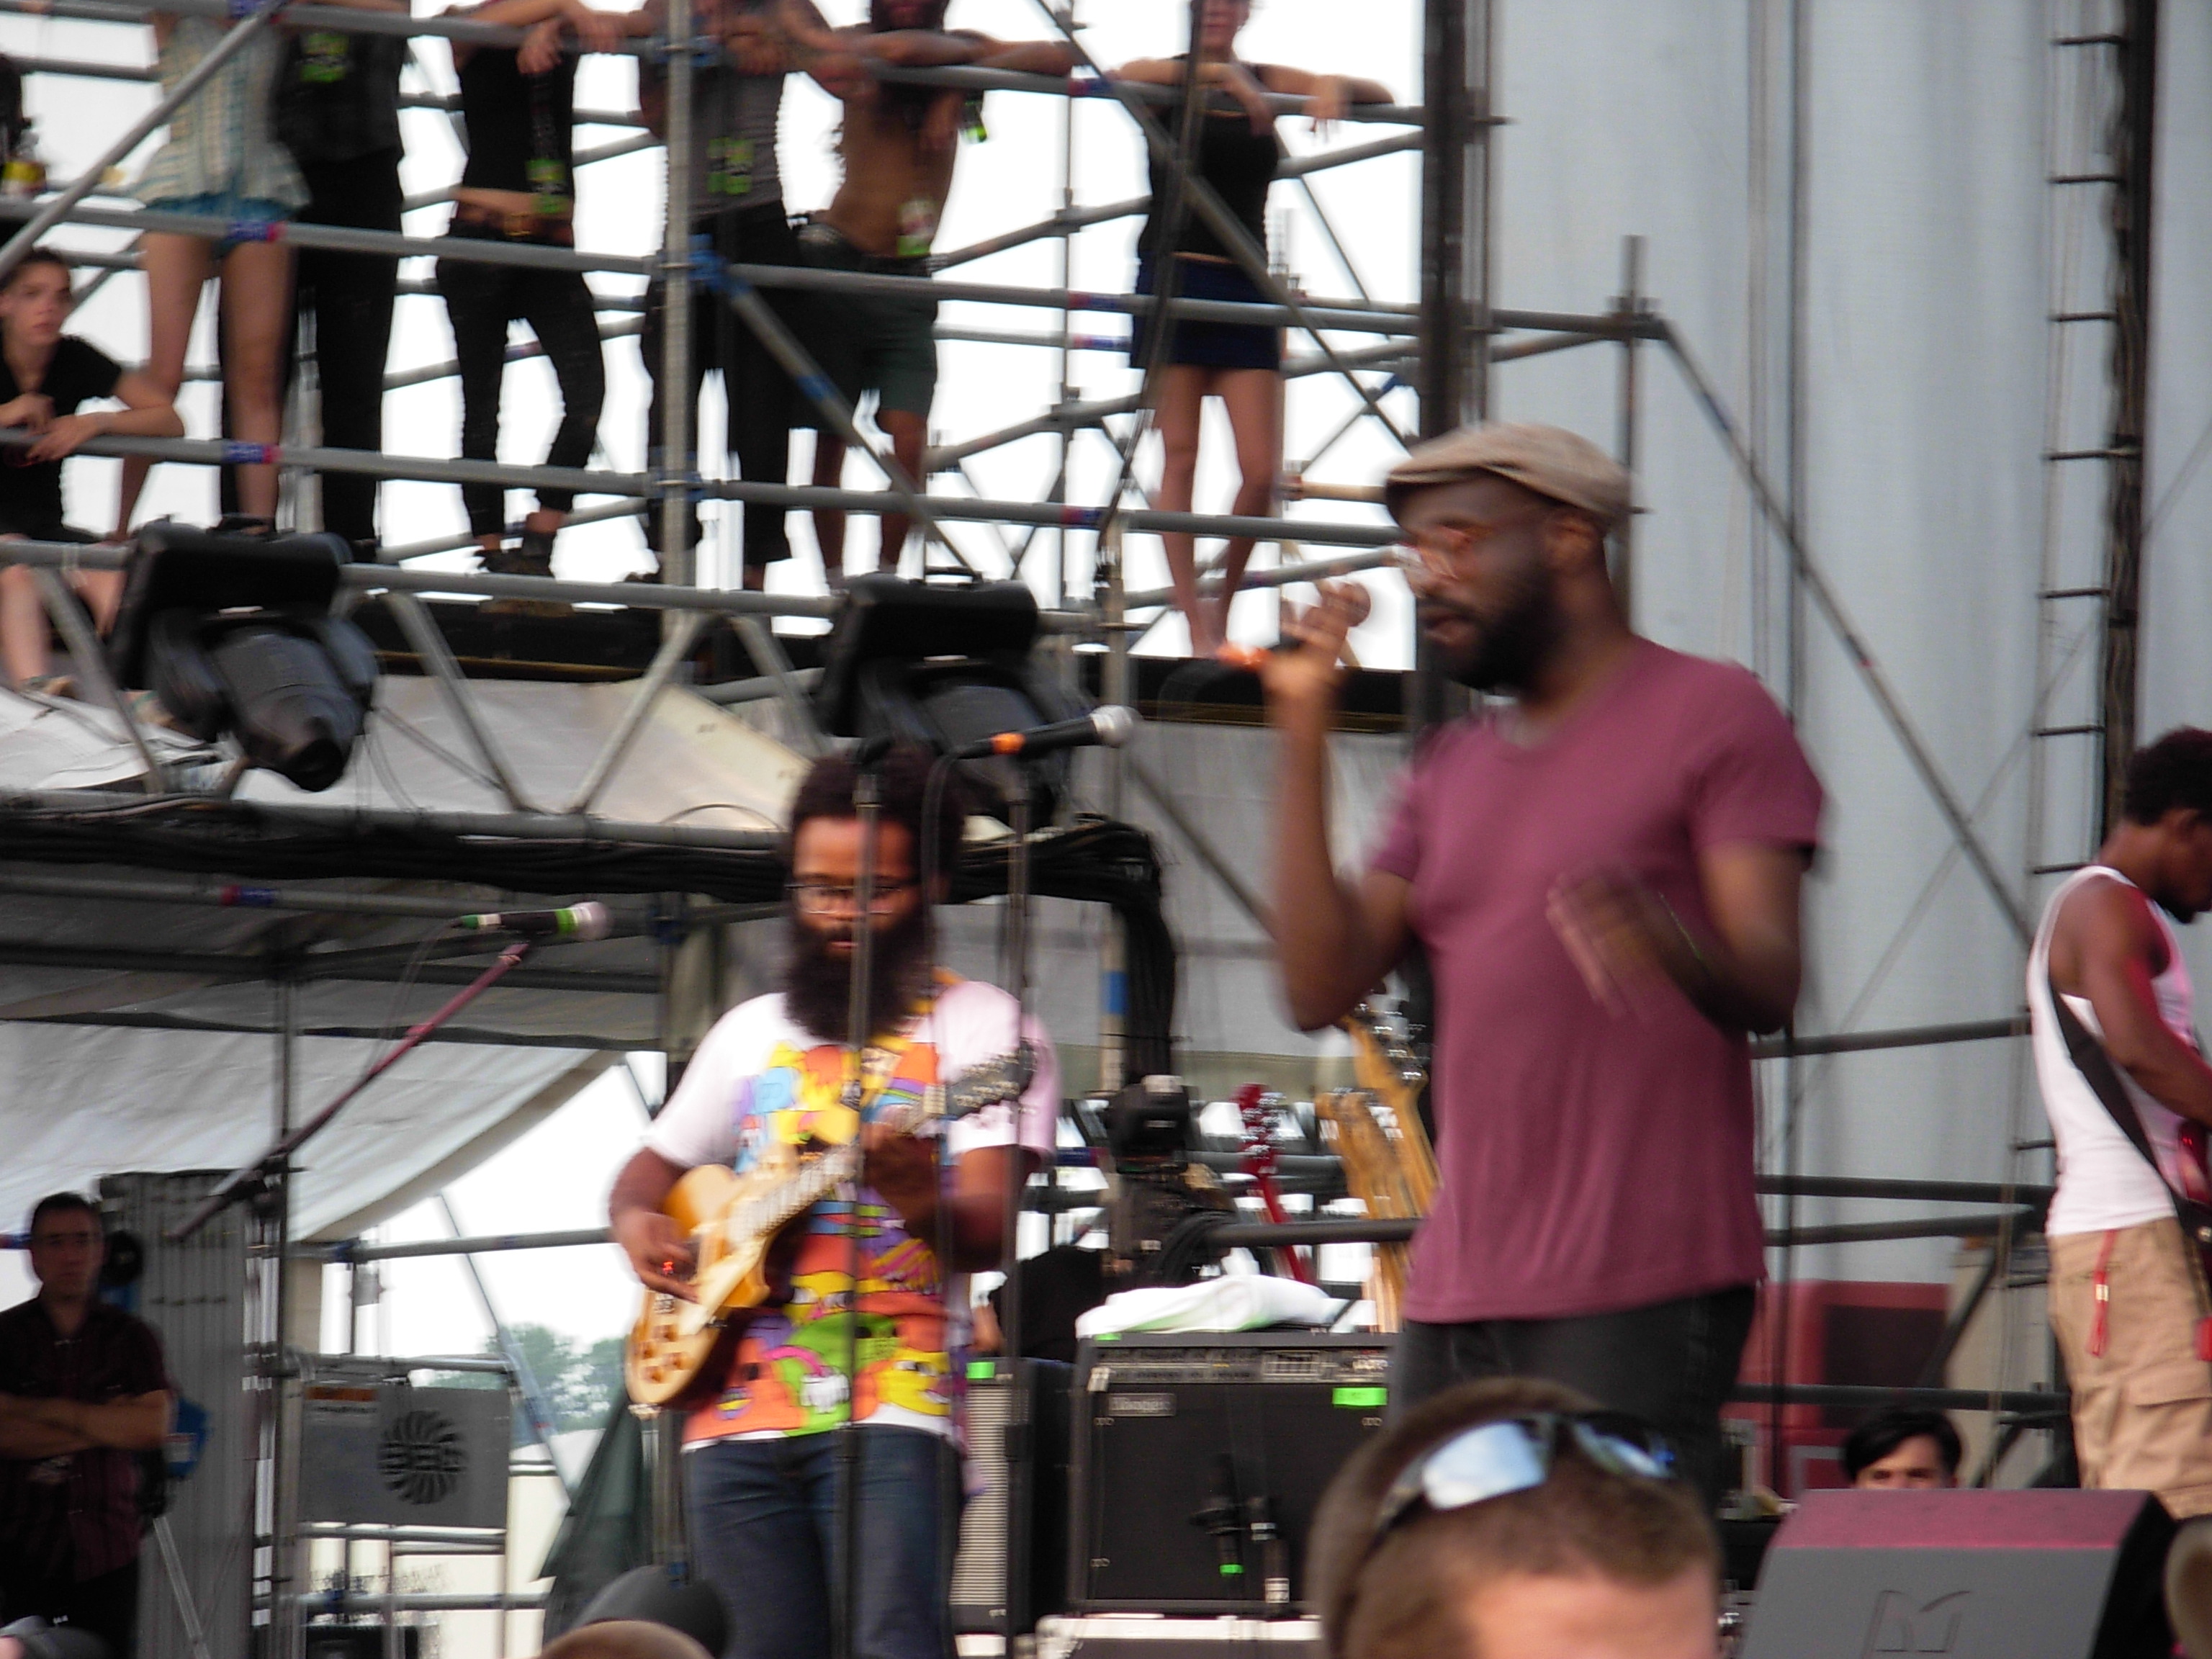 kyp-malone-and-tunde-adebimpe.JPG